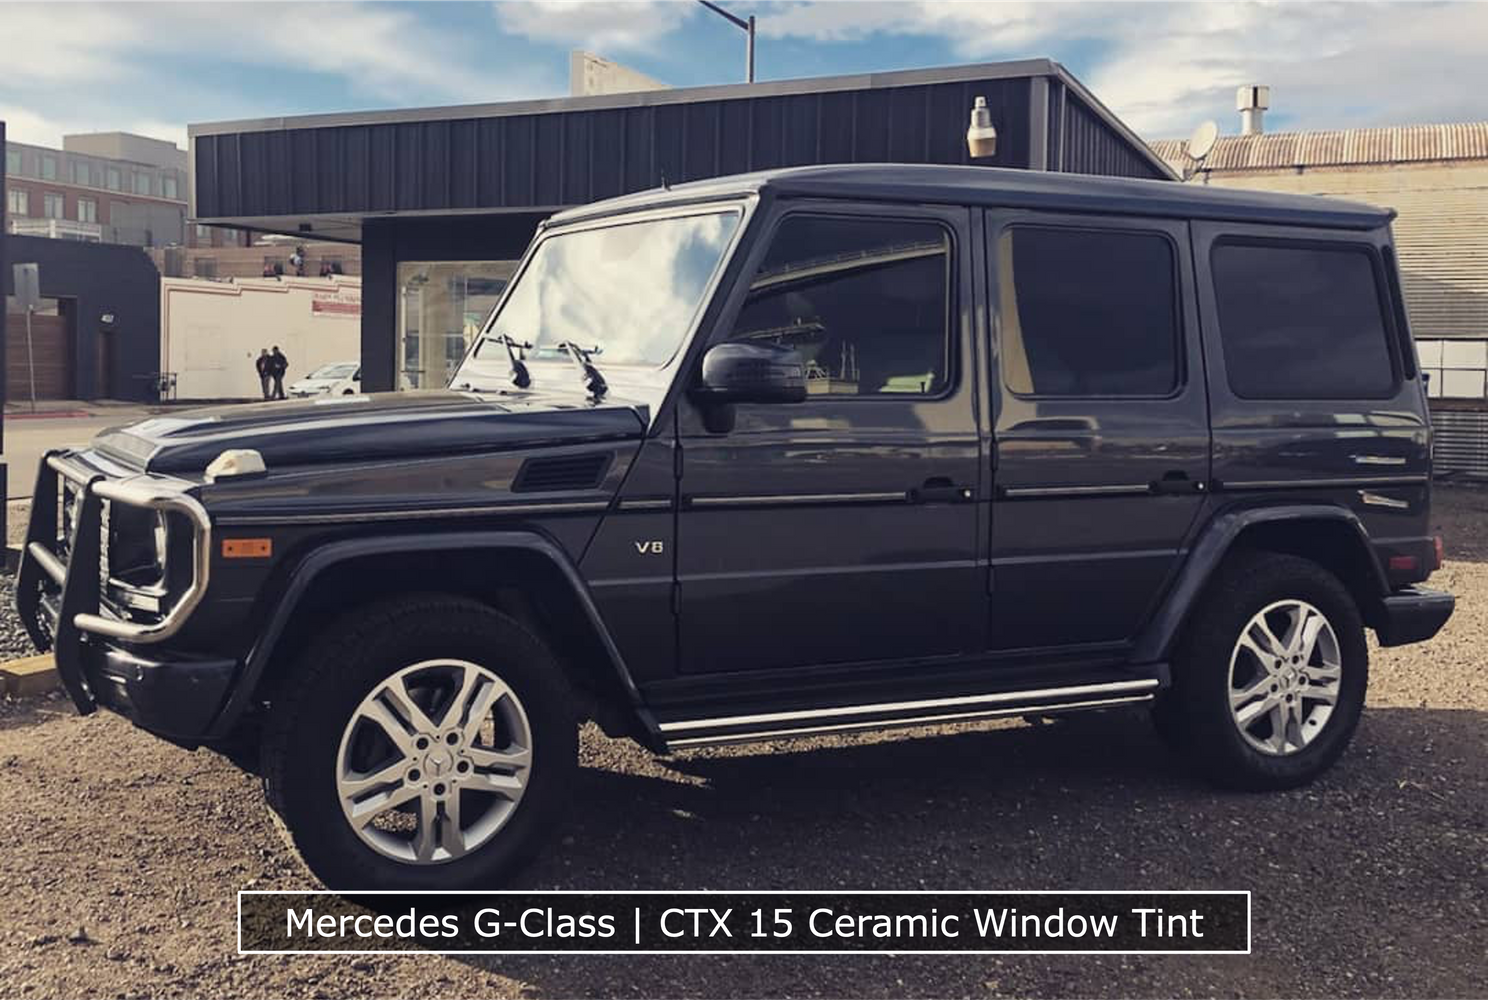 G-Class Mercedes With Ceramic Window Tint